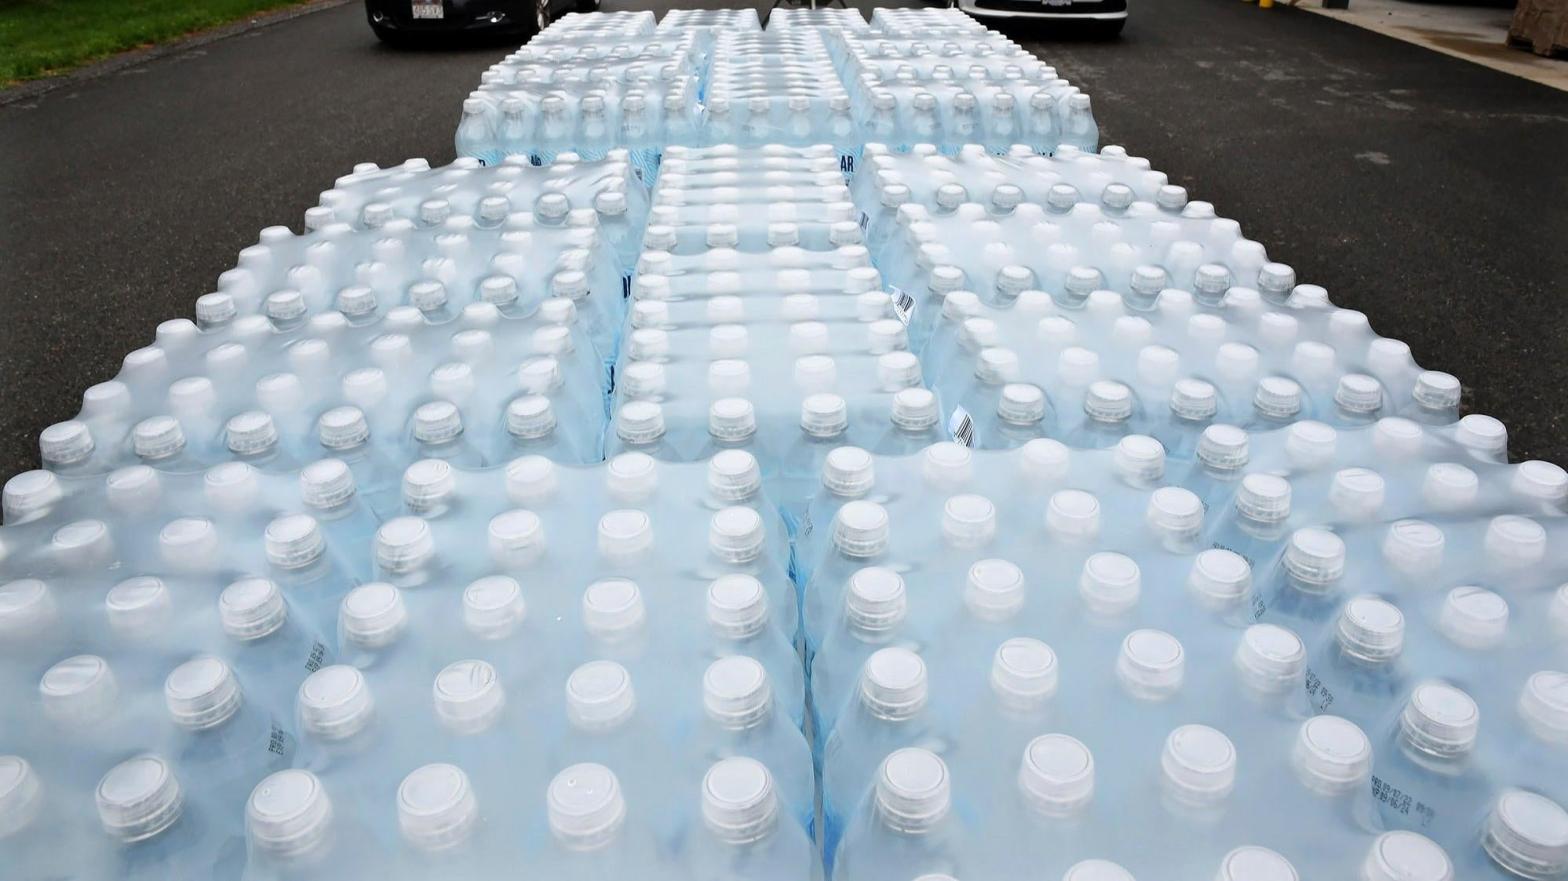 Free water distribution station in Mansfield, MA on Monday, Sept. 12, 2022, after E. coli bacteria was found in town water.  (Photo: Mark Stockwell/The Sun Chronicle, AP)